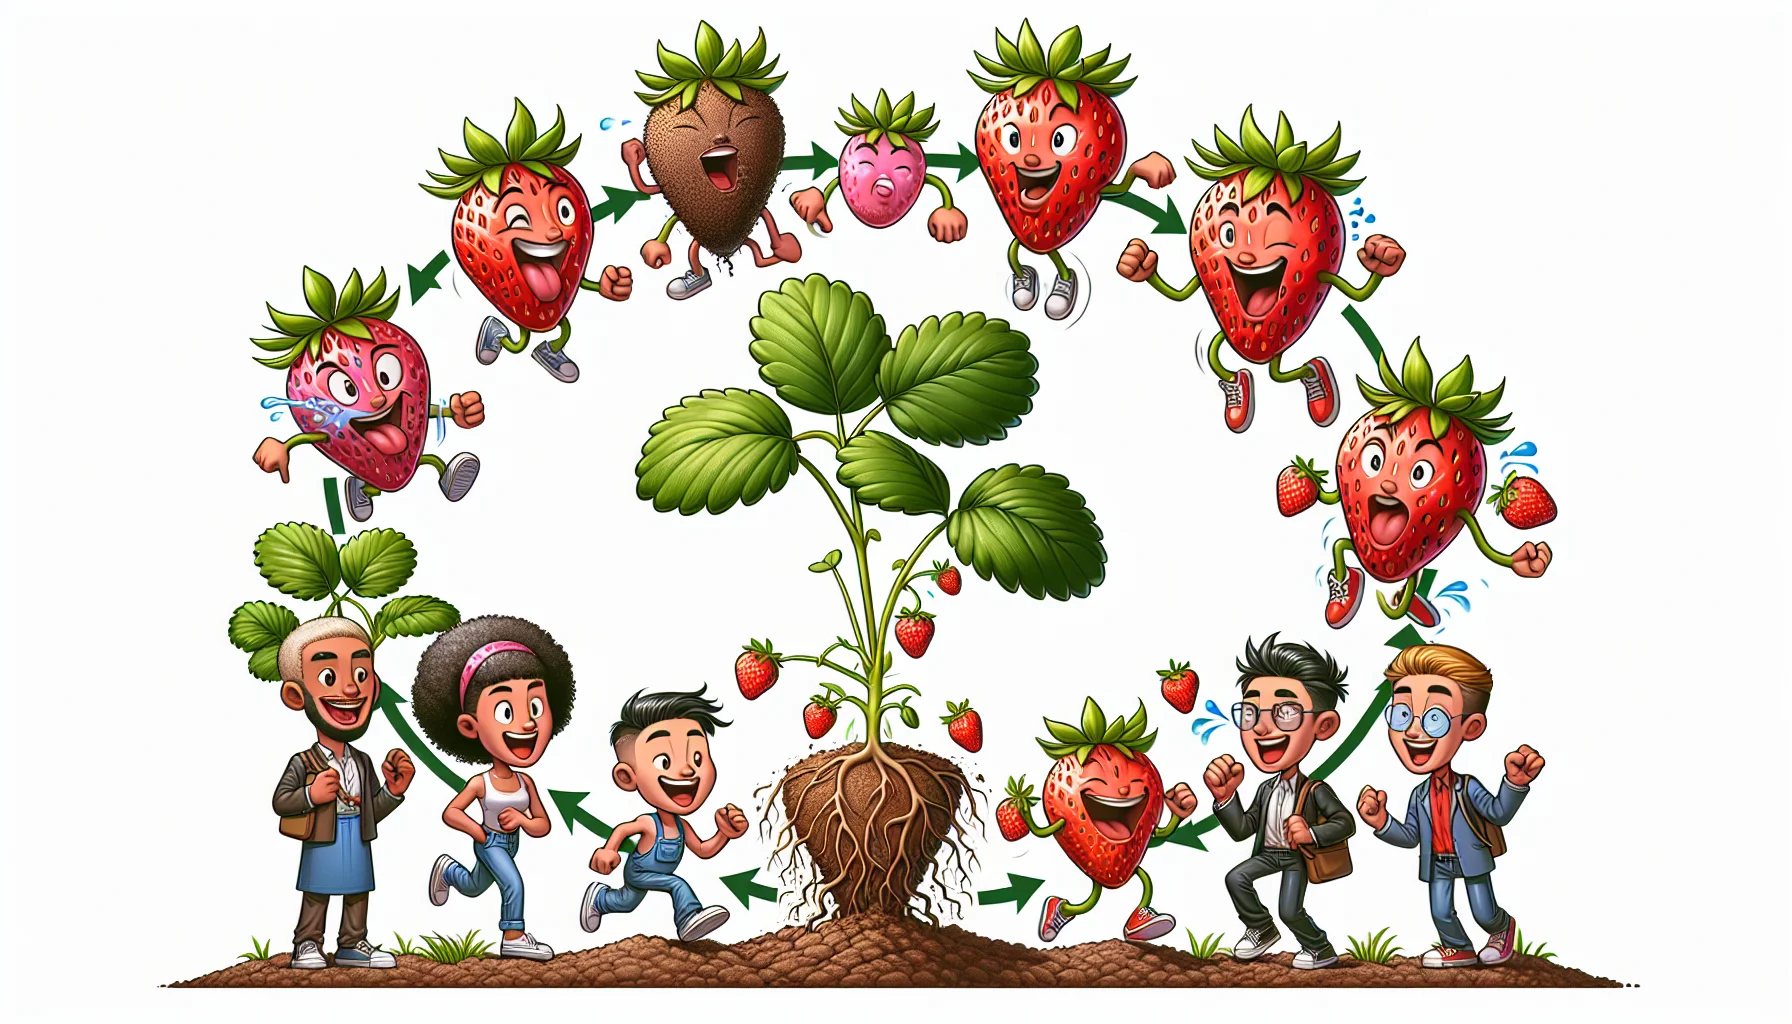 Create a detailed and realistic image of the life cycle of a strawberry plant, presented in a humorous manner to encourage an appreciation for gardening. The image should start with a seed, then depict it sprouting into a tiny plant, which grows into a mature strawberry bush with ripe, red fruits. Add comical elements such as the seeds eagerly jumping into the soil, the plants flexing their 'muscles' as they grow, and ripe strawberries showing gleeful expressions as they become ready for harvest. Depict a diverse range of people from different descents such as Caucasian, Hispanic, Black, Middle-Eastern, and South Asian, all portrayed in a lighthearted manner, chuckling and enjoying the sights of this fun strawberry plant's journey.